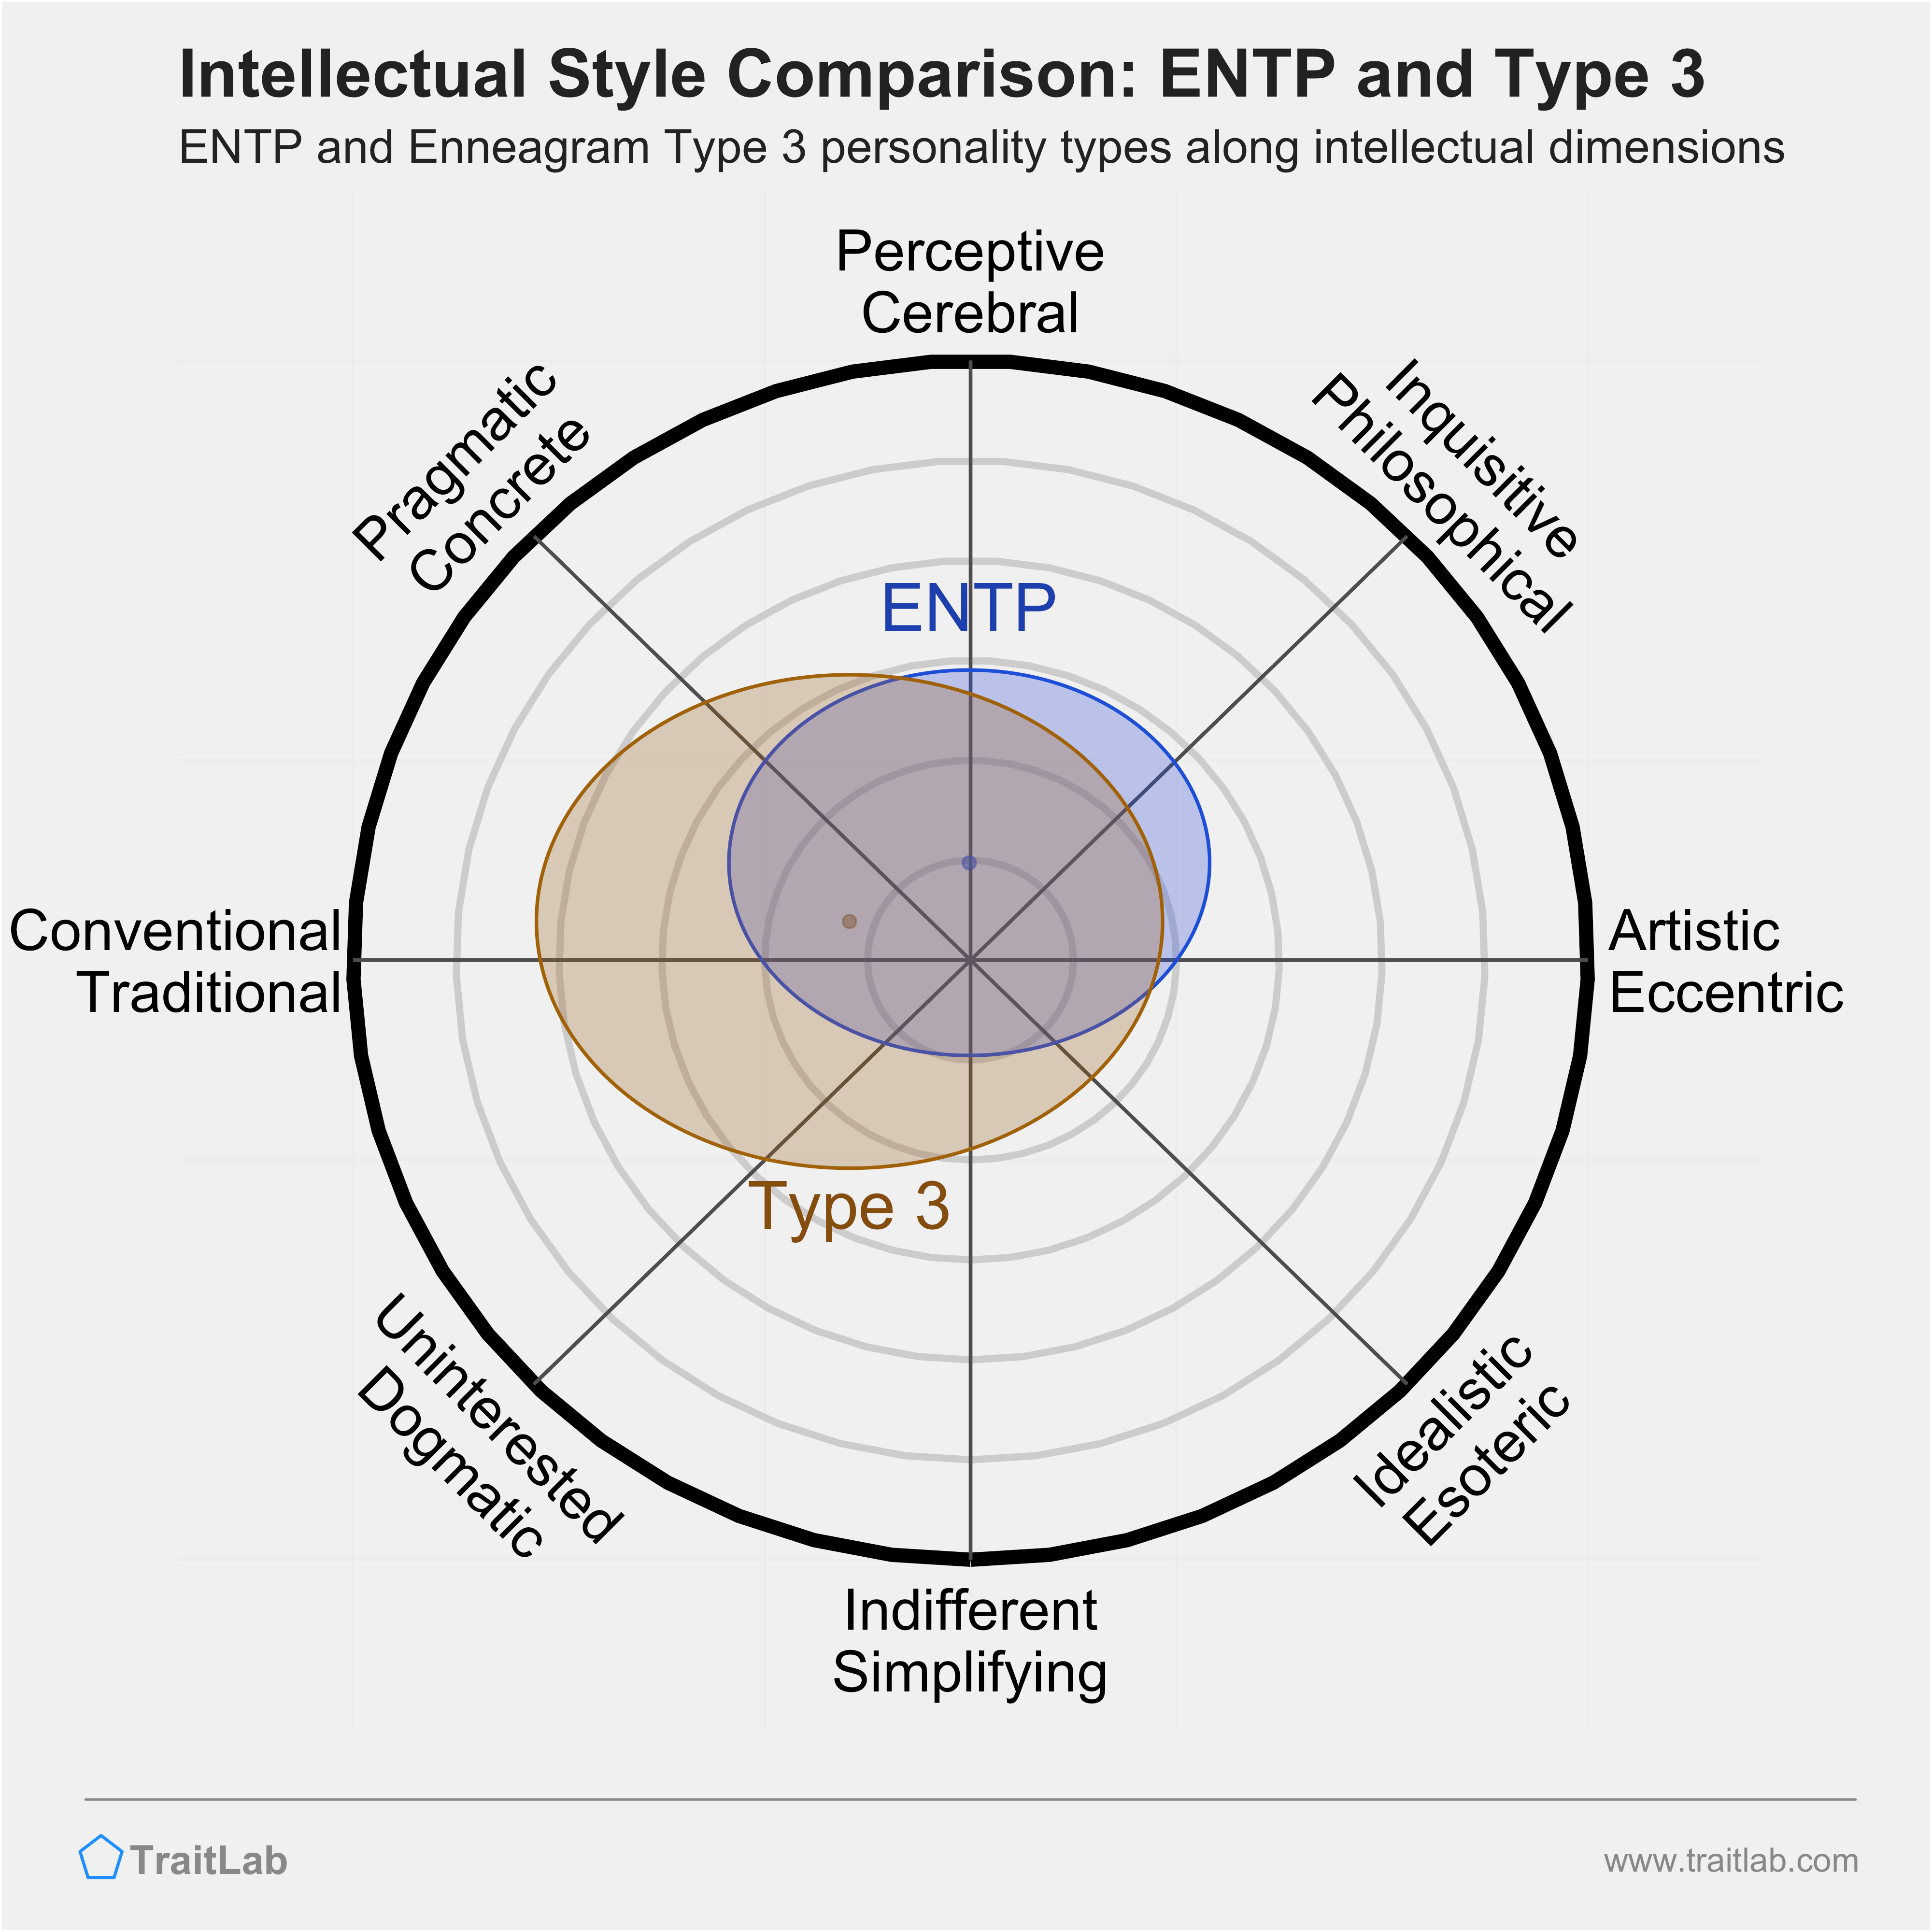 ENTP and Type 3 comparison across intellectual dimensions